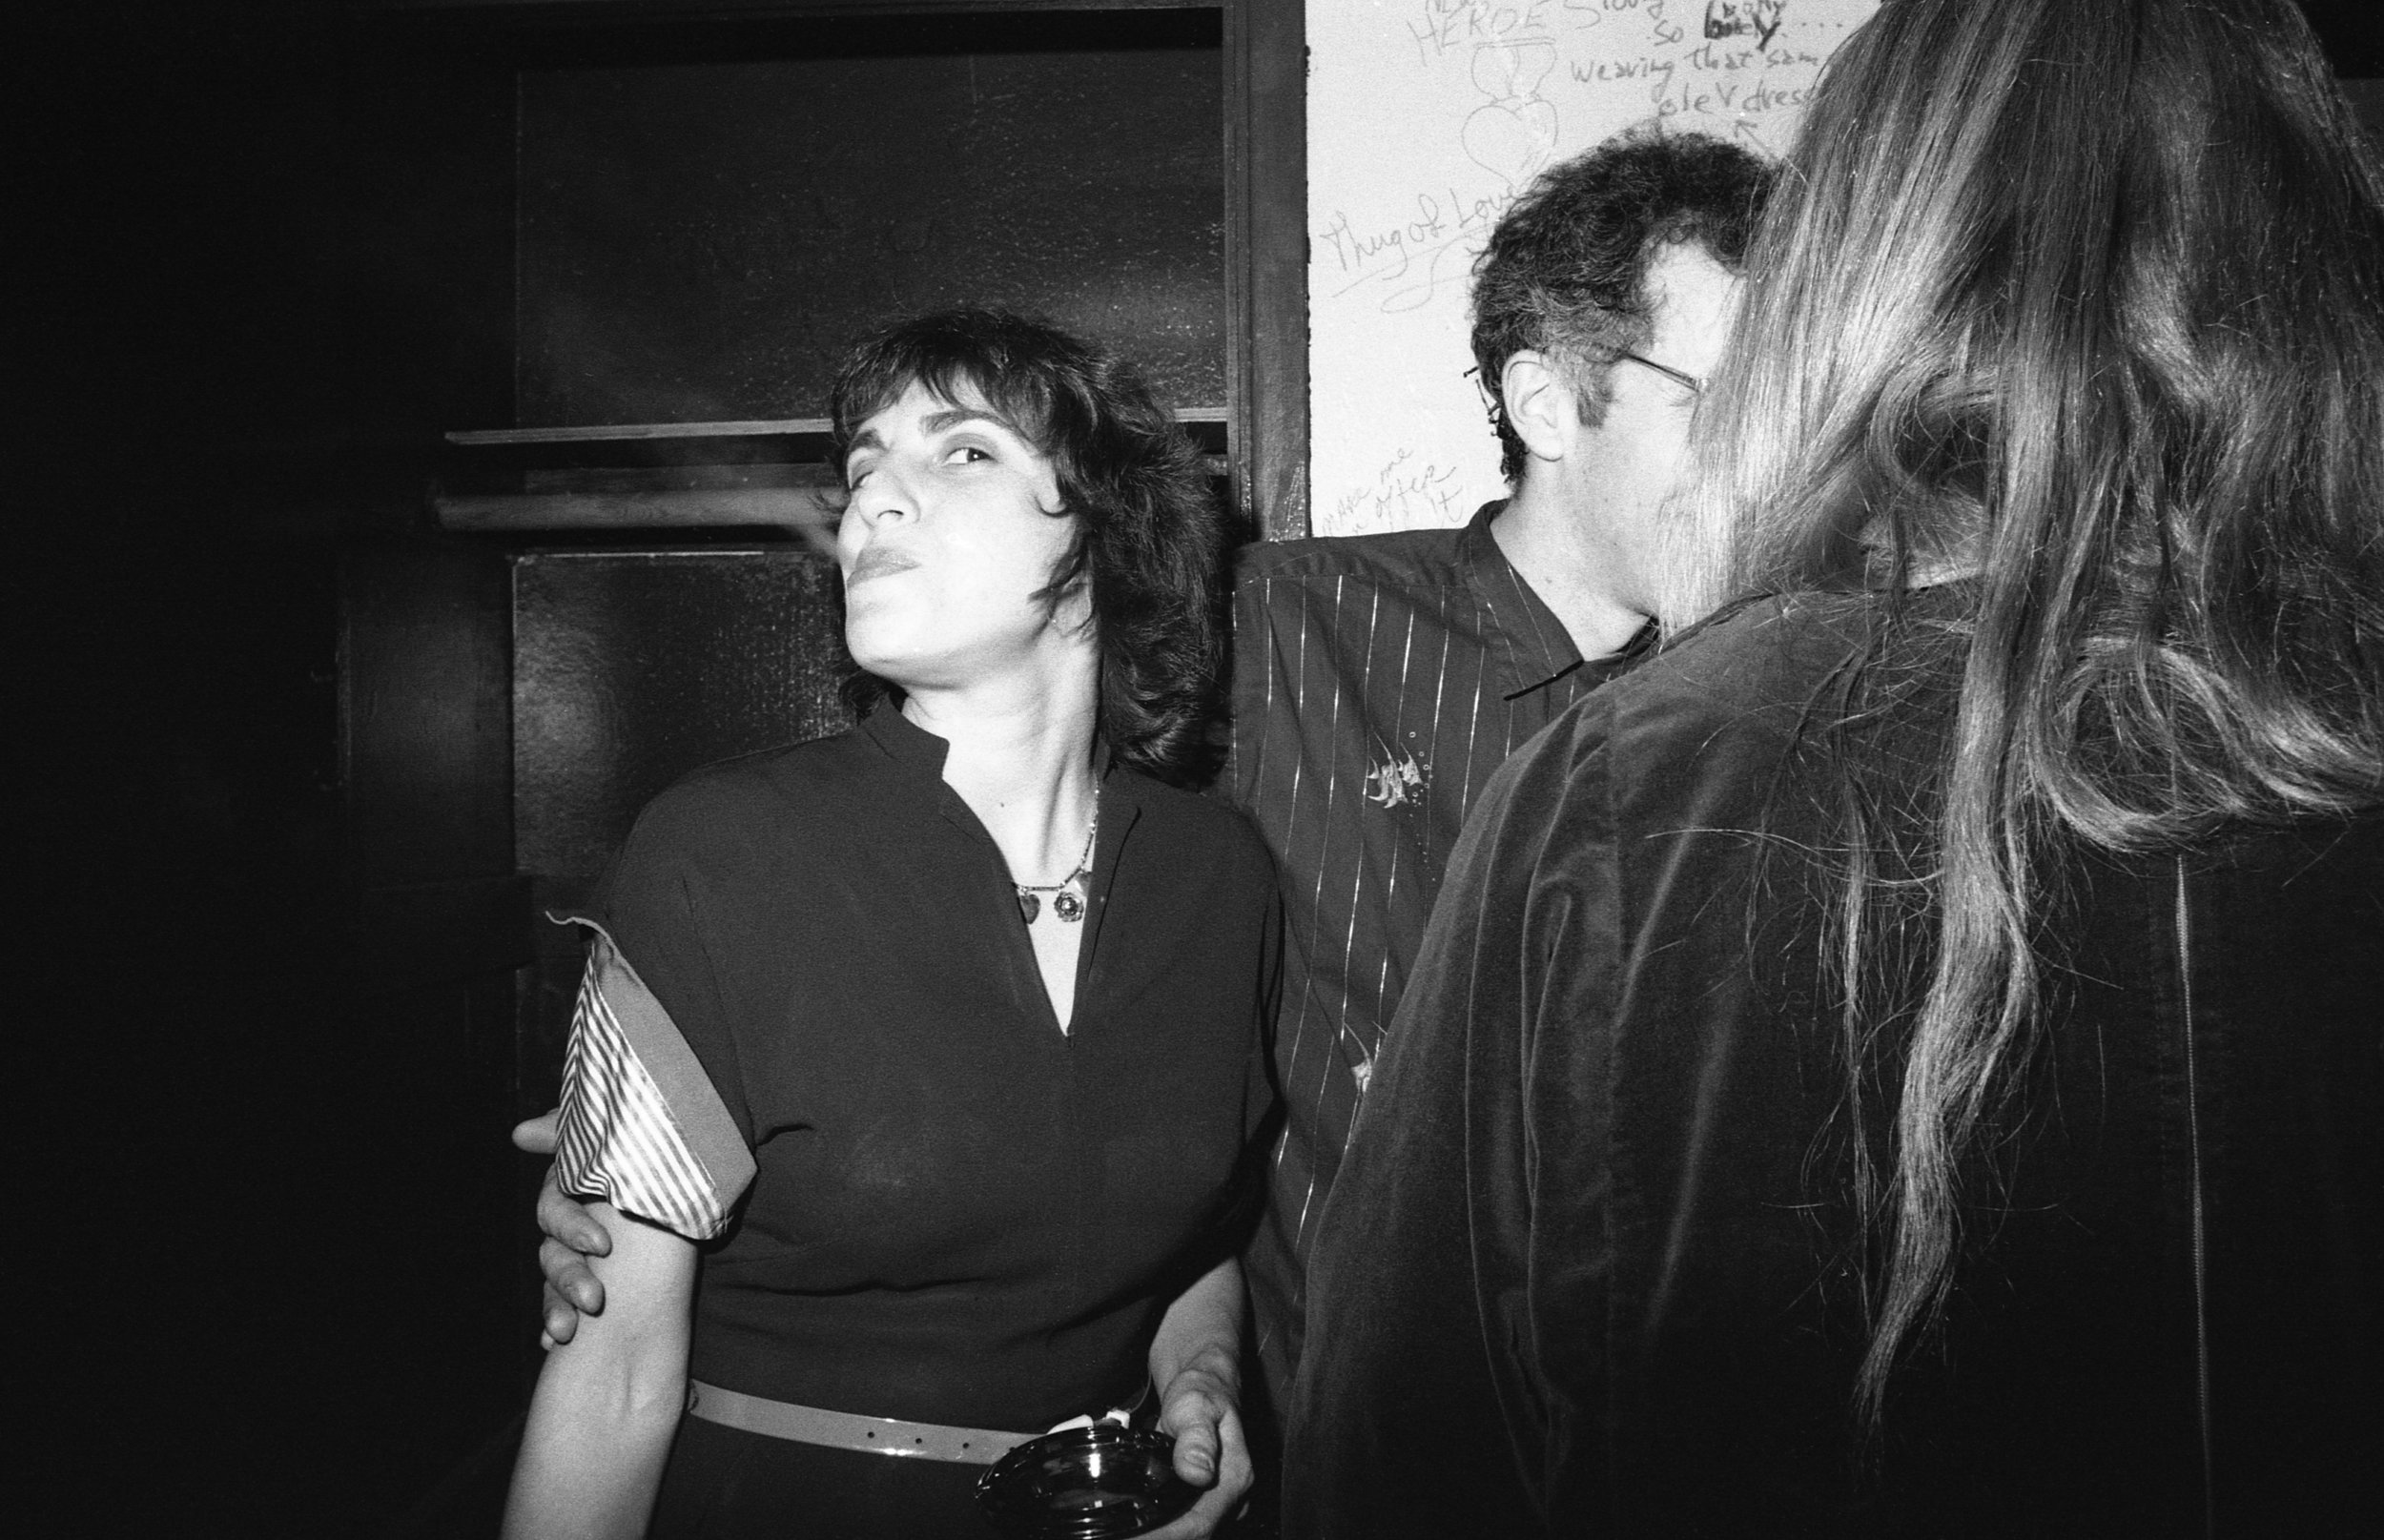 Los Angeles, ca. 1980. Christine Rush backstage at the Whisky with Tim Barrett.